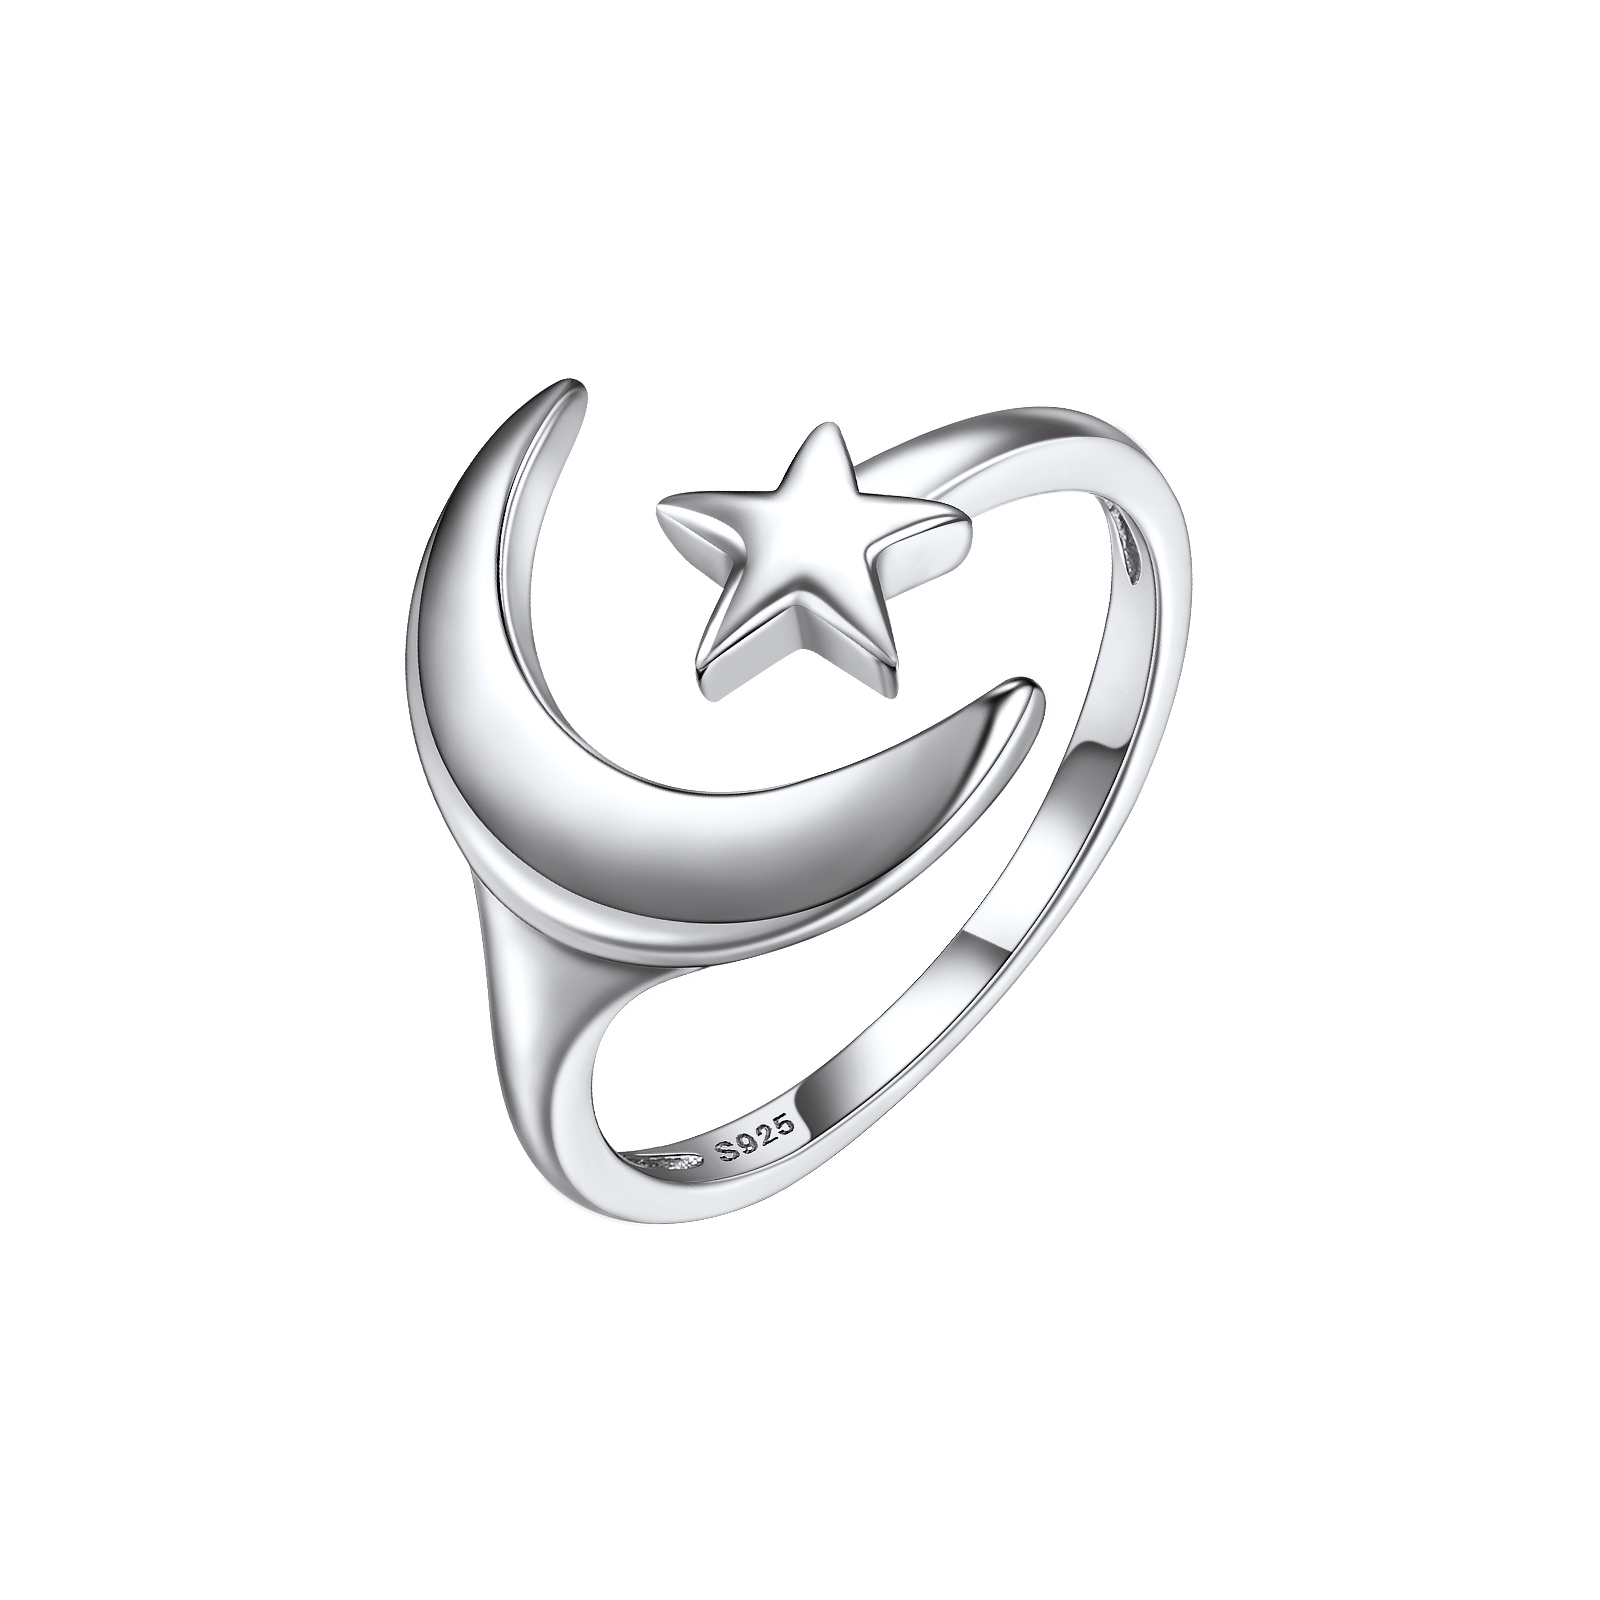 ChicSilver 925 Sterling Silver Moon Star Ring Engagement Ring